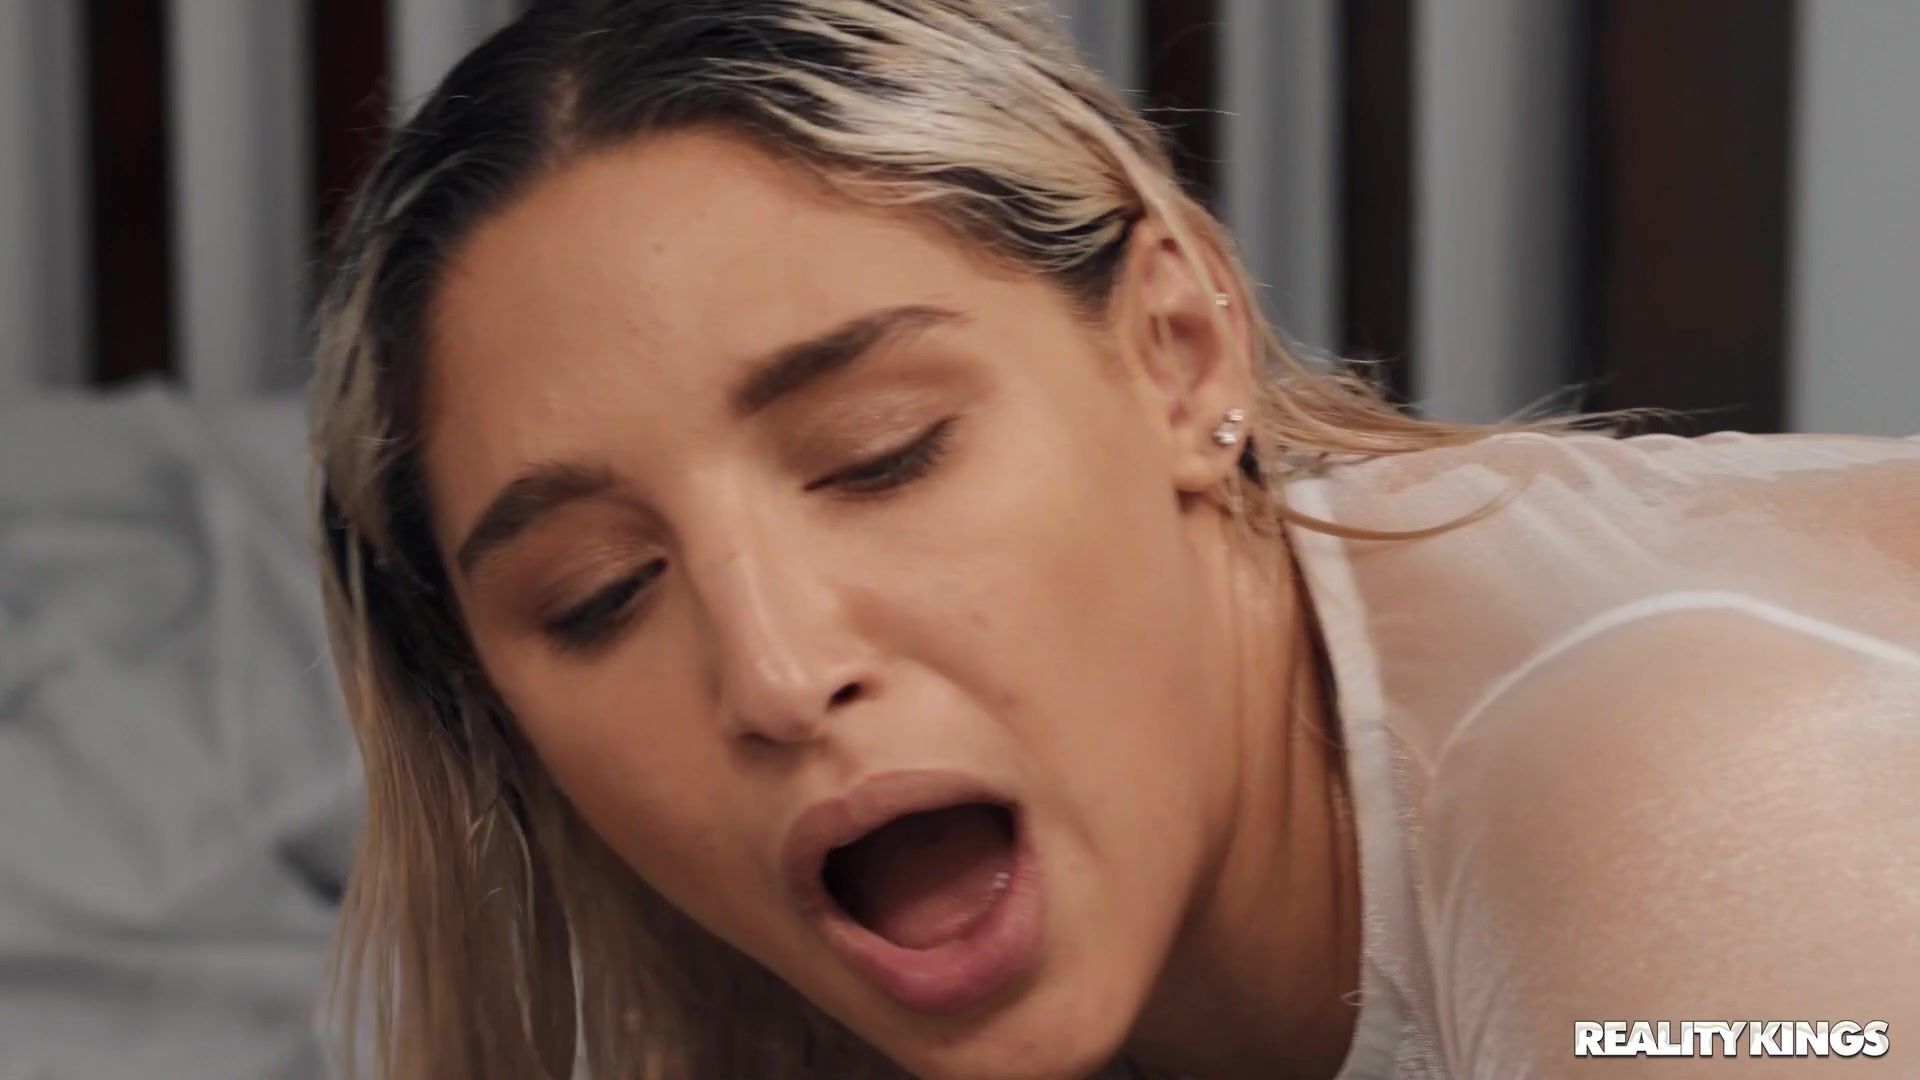 Nasty Fit hussy Abella Danger rides giant cock like a real pro Blond